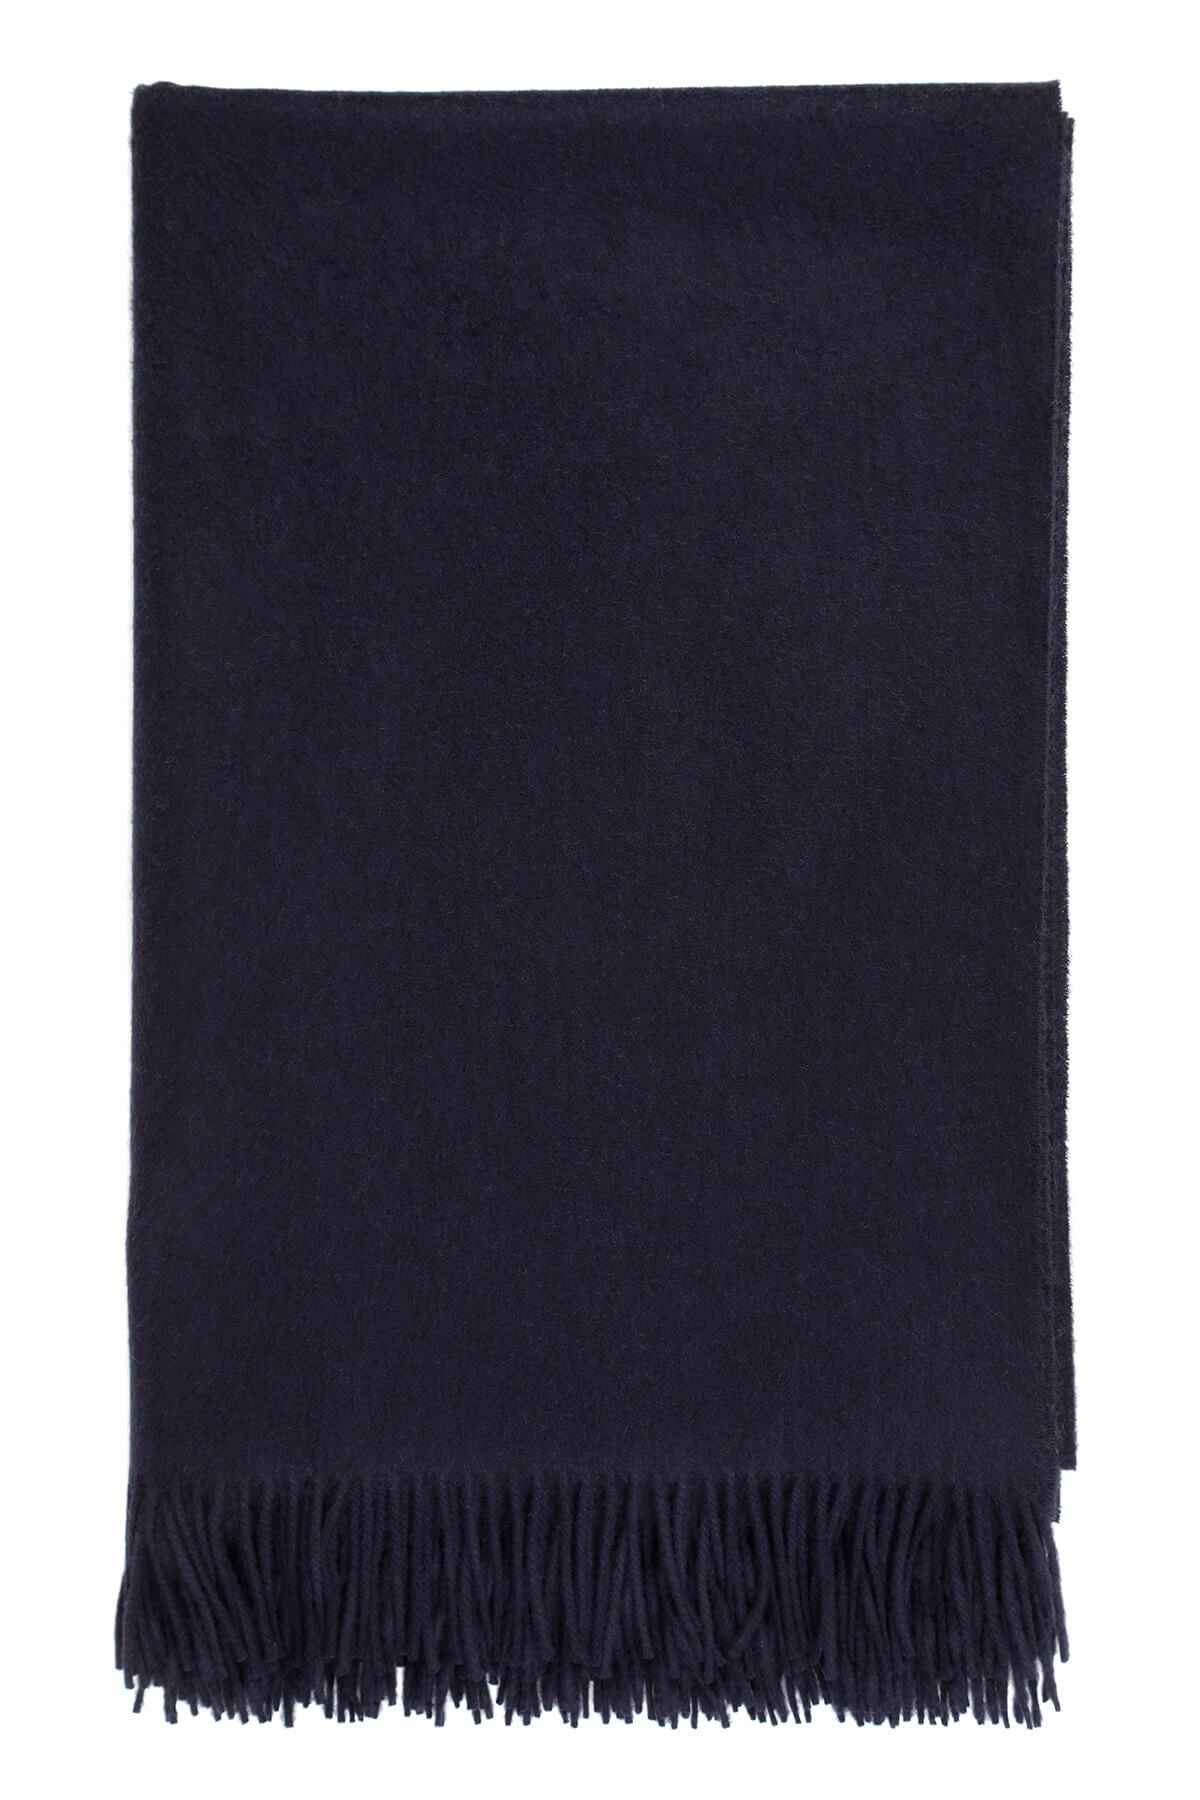 Johnstons of Elgin’s Cashmere Bed Throw in Navy on white background WA001159SD7330ONE